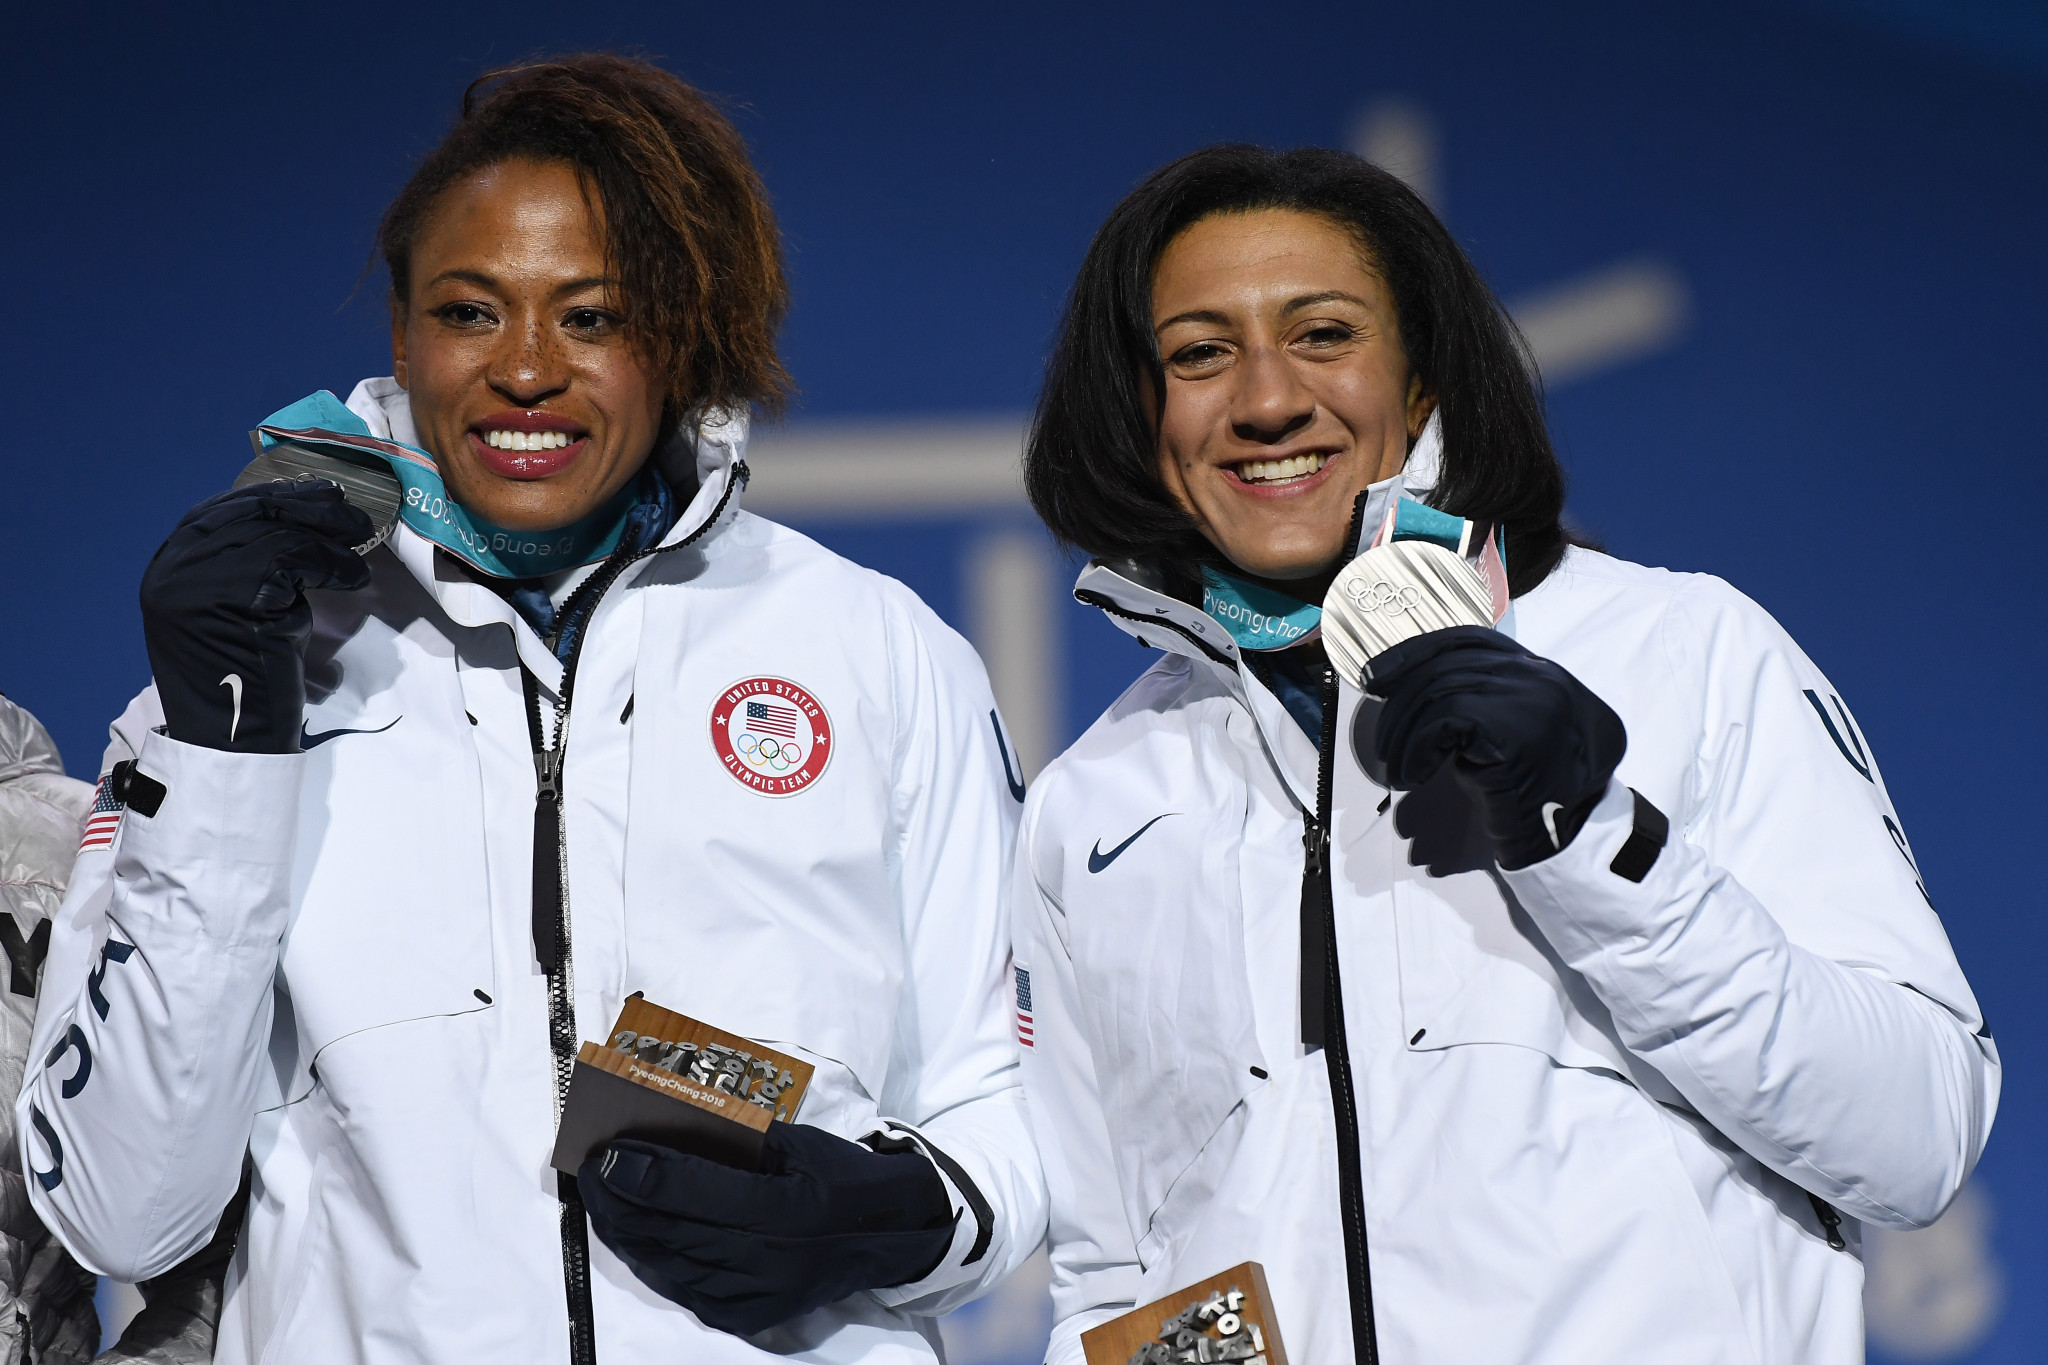 Lauren Gibbs, left, and Elana Meyers Taylor, right, won silver in the two-woman bobsleigh at the Pyeongchang 2018 Winter Olympics ©Getty Images